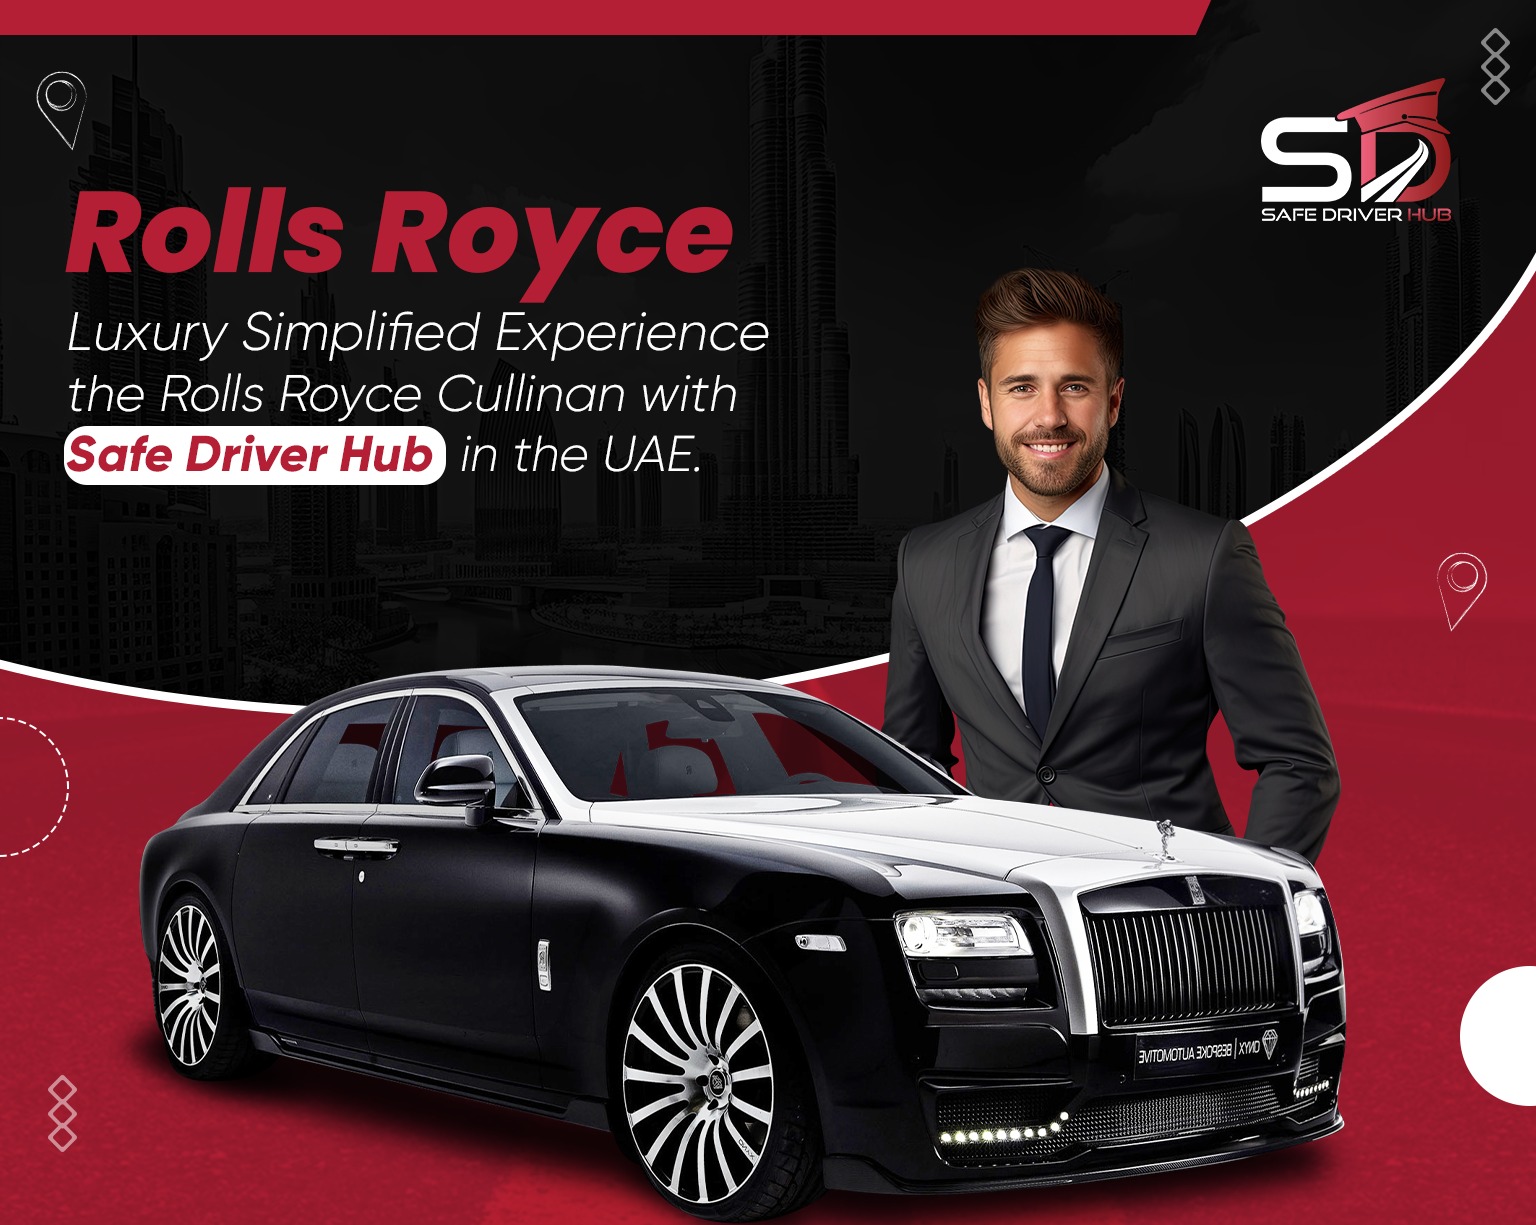 Luxury-Simplified-Experience-the-RollsRoyce-Cullinan-with-SafeDriver-Hub-in-the-UAE